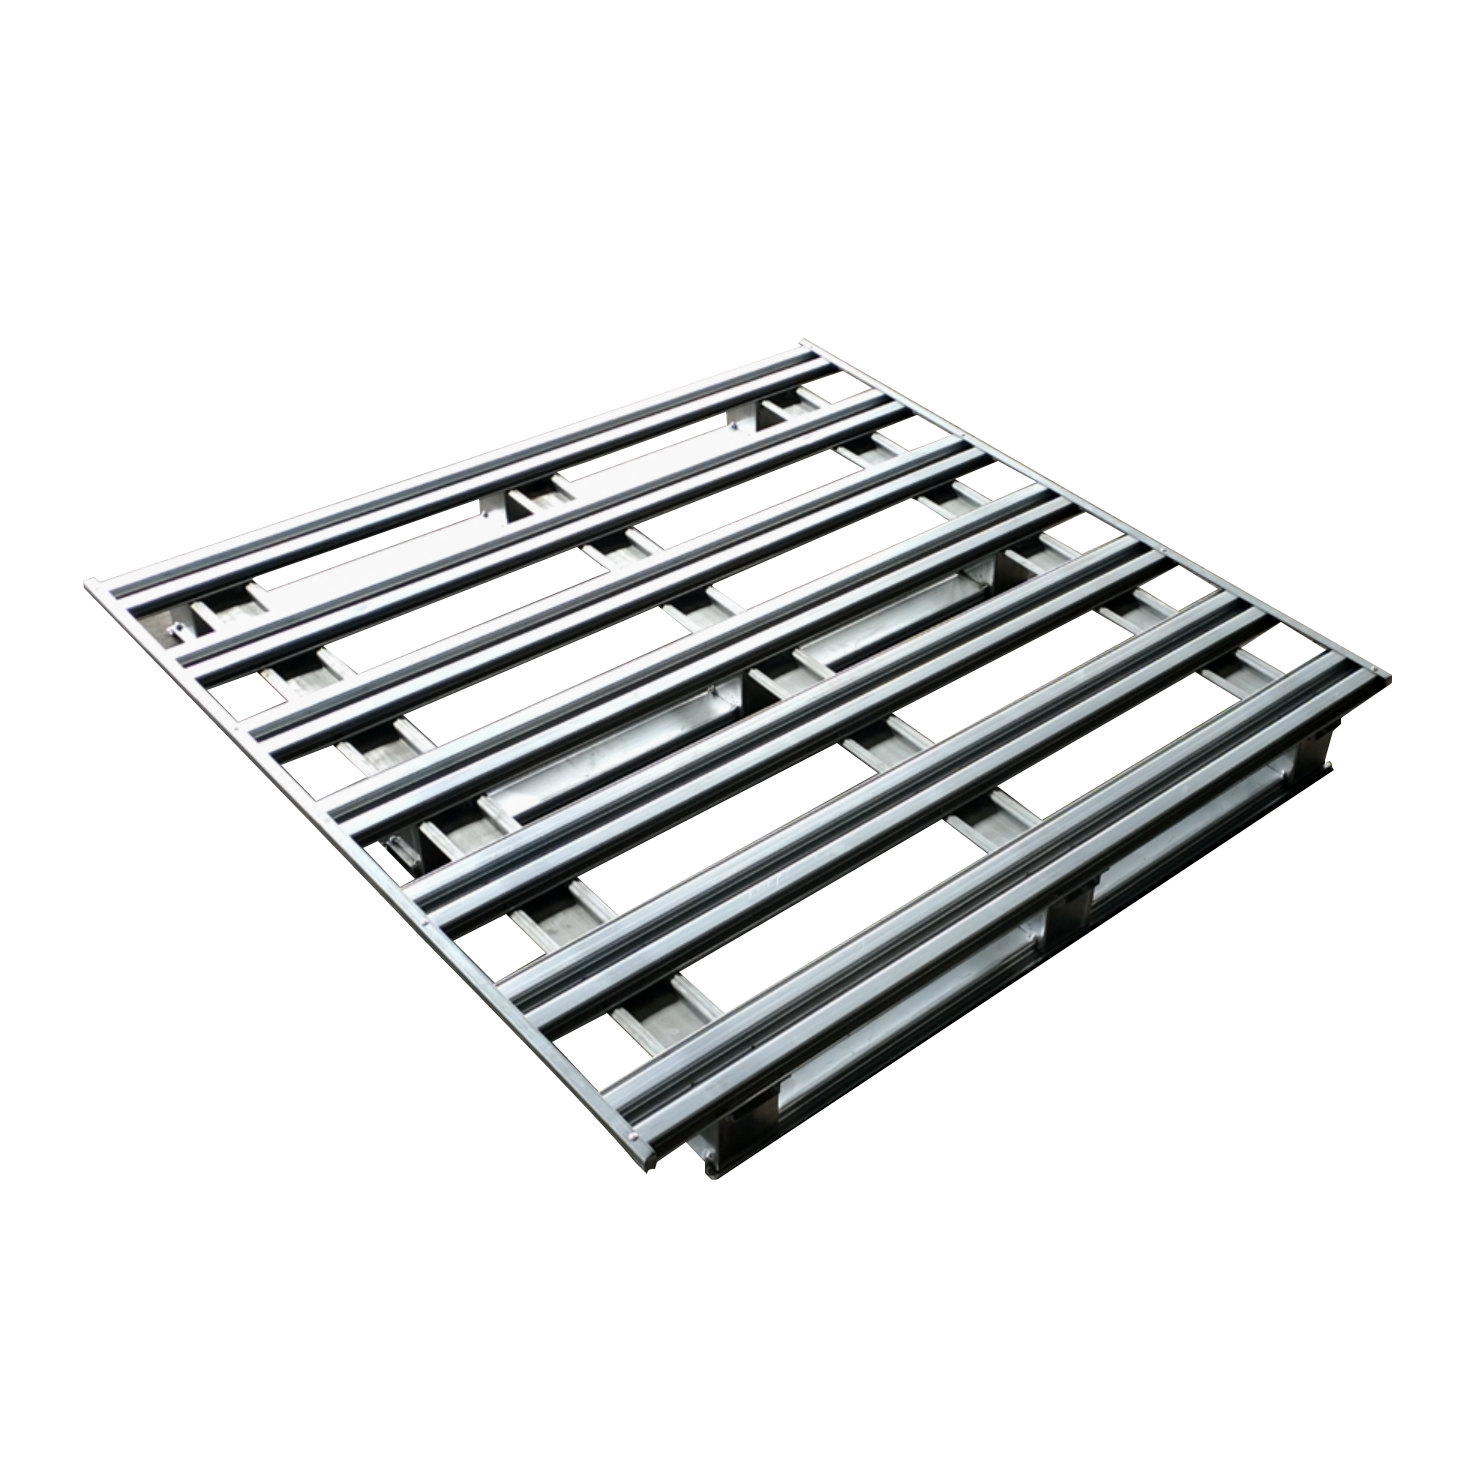 What are the advantages of color steel cable tray?